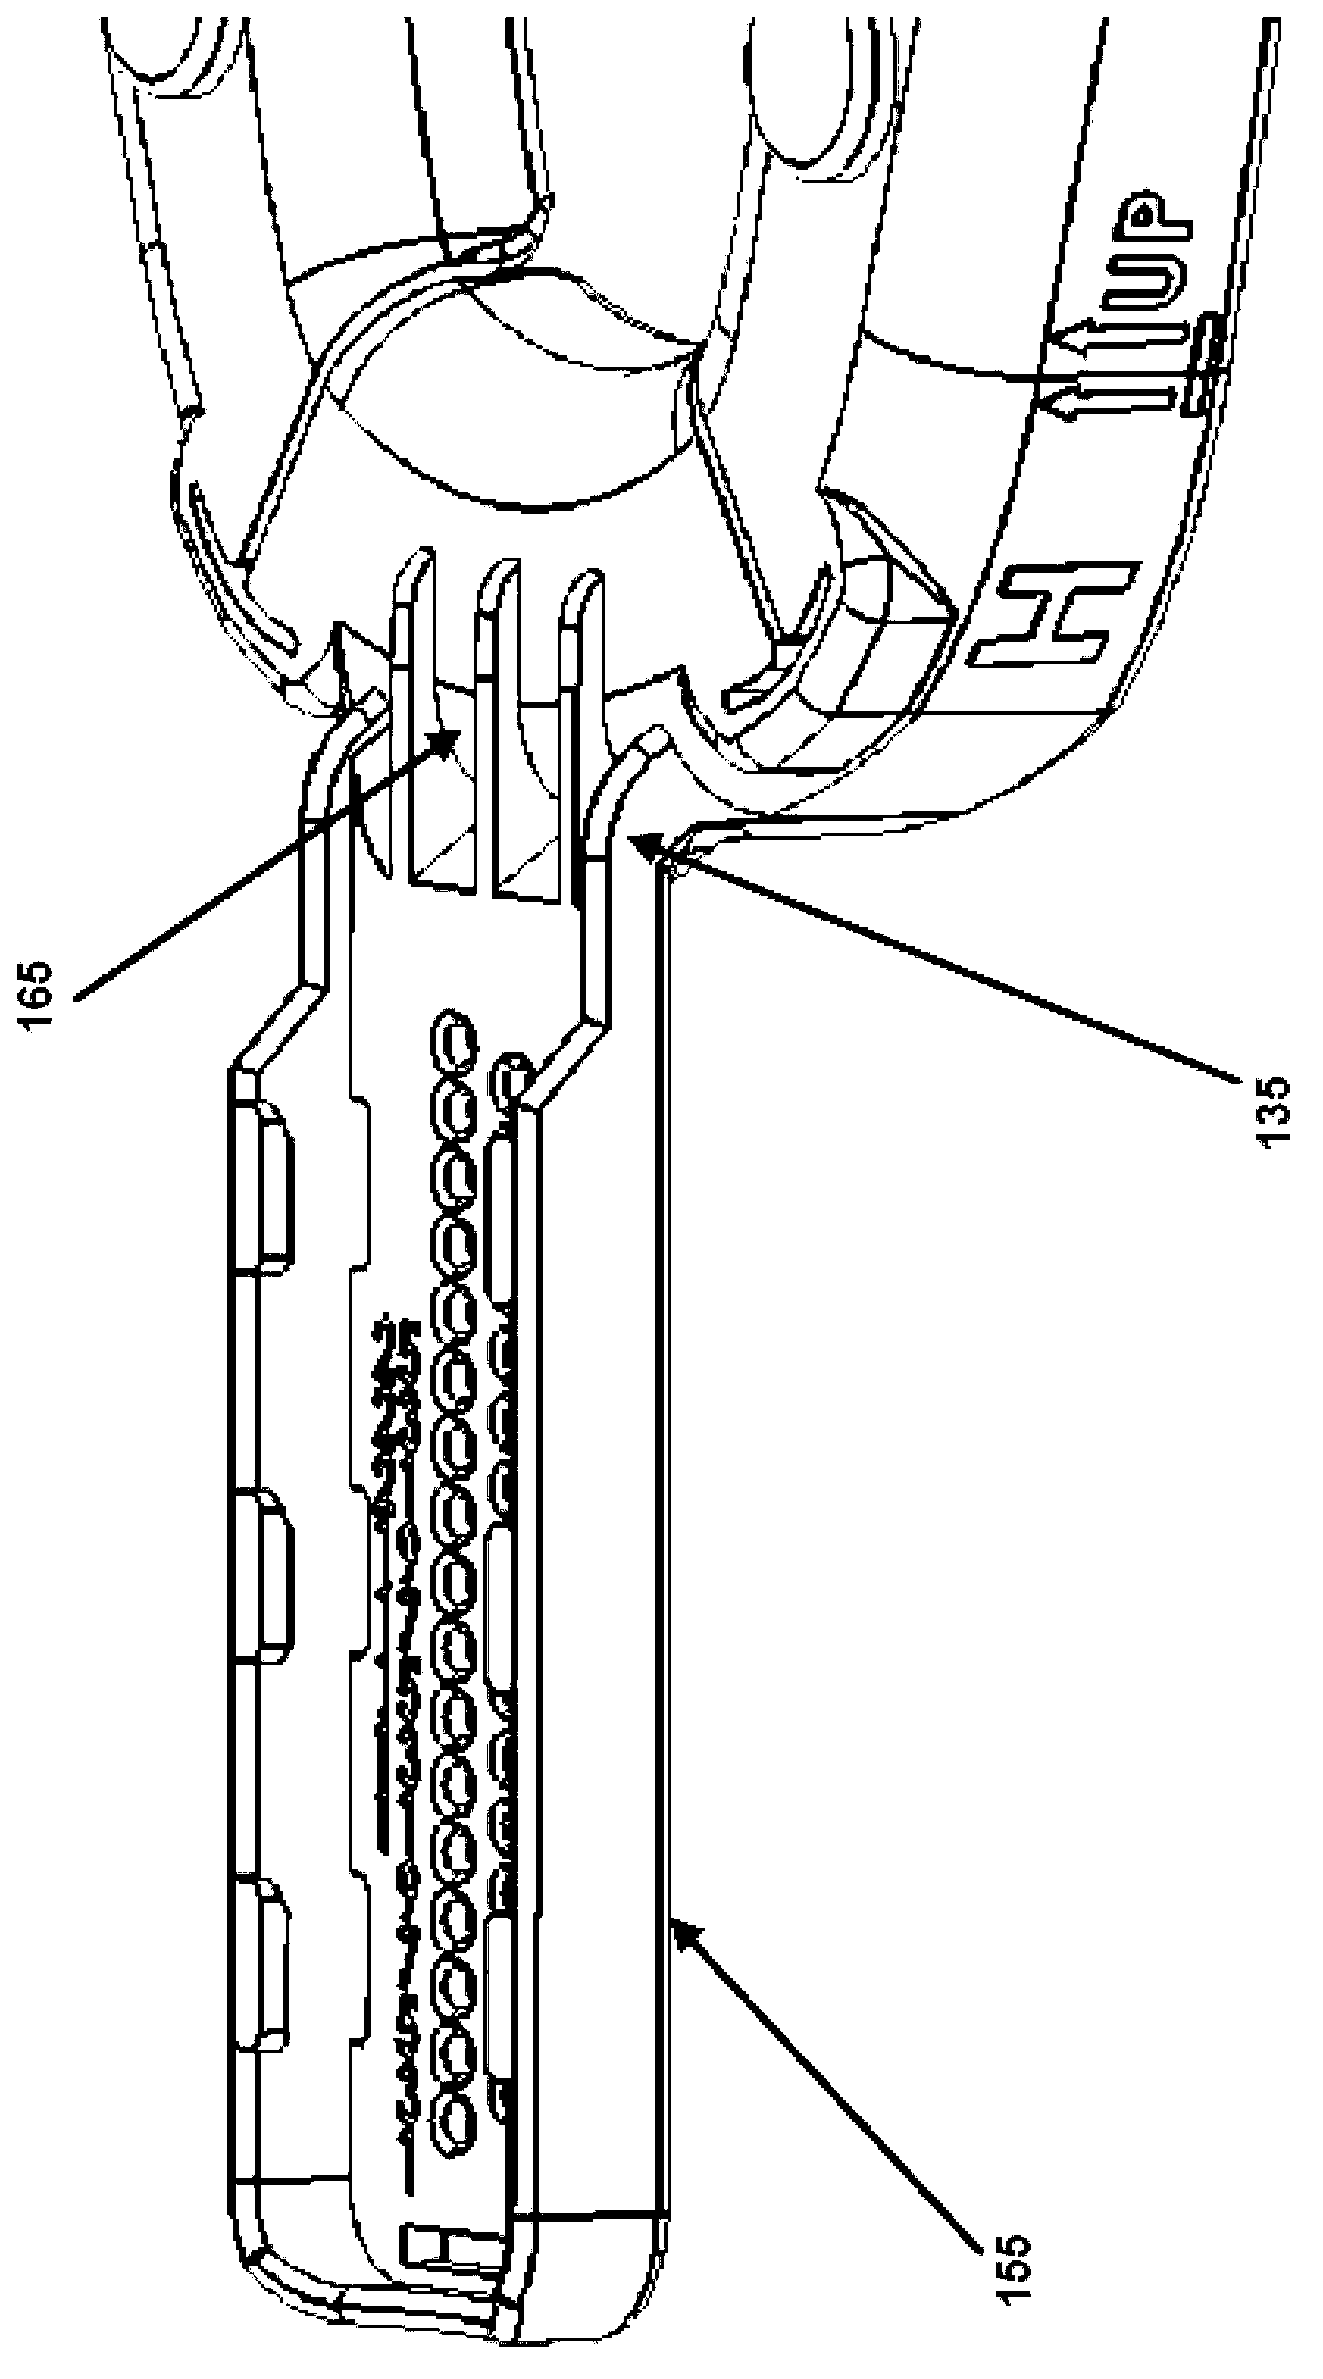 Systems And Methods For Optimizing Oral Appliance Therapy For The Treatment Of Sleep Apnea